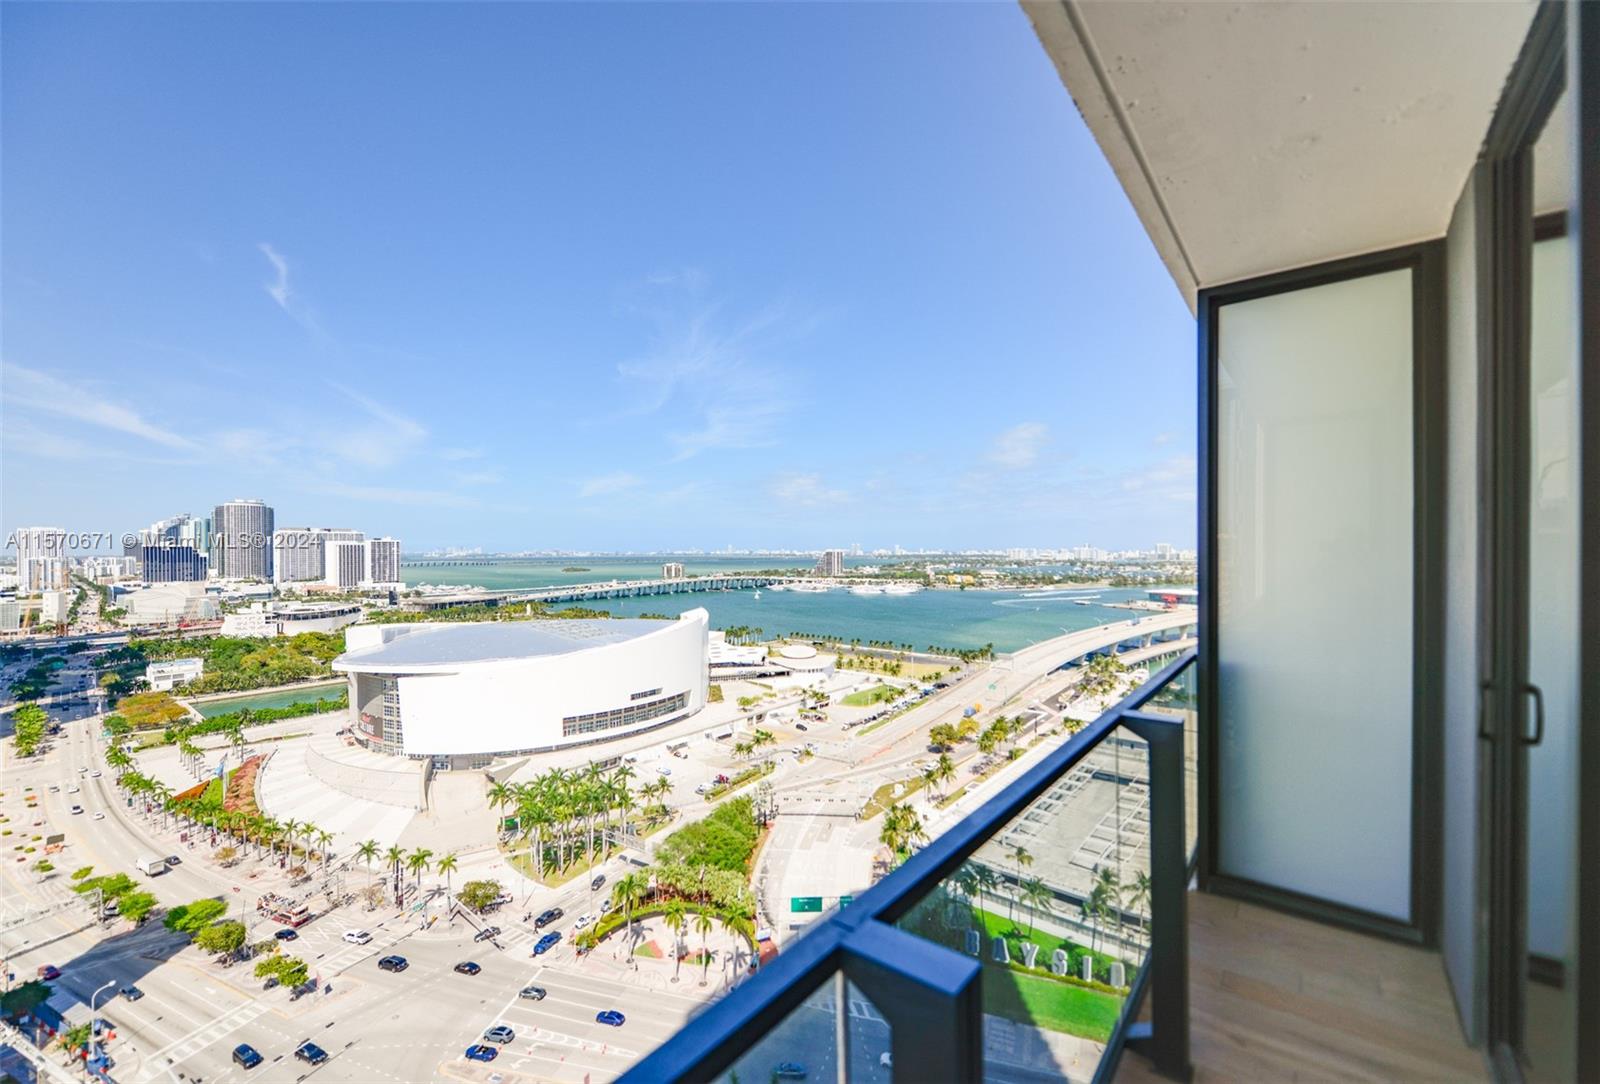 In the heart of Downtown Miami, the Elser sets a new standard for luxury living and smart investment. This stunning studio is not just a home; it's an opportunity. Allows short term rentals managed across top rental platforms like Airbnb, VRBO, it offers you the chance to earn income or as a personal getaway. Enjoy breathtaking views, 24/7 concierge, smart technology, and EV charging. The amenities? Unmatched. Dive into a resort-style pool, unwind in exclusive lounge areas, and work seamlessly in our state-of-the-art co-working space. Steps away from Miami's best – Whole Foods, FTX Arena, South Beach. The Elser is not just a residence; it's the pinnacle of Miami living. Whether you're looking for your next home or a smart investment, welcome to your future in Miami.